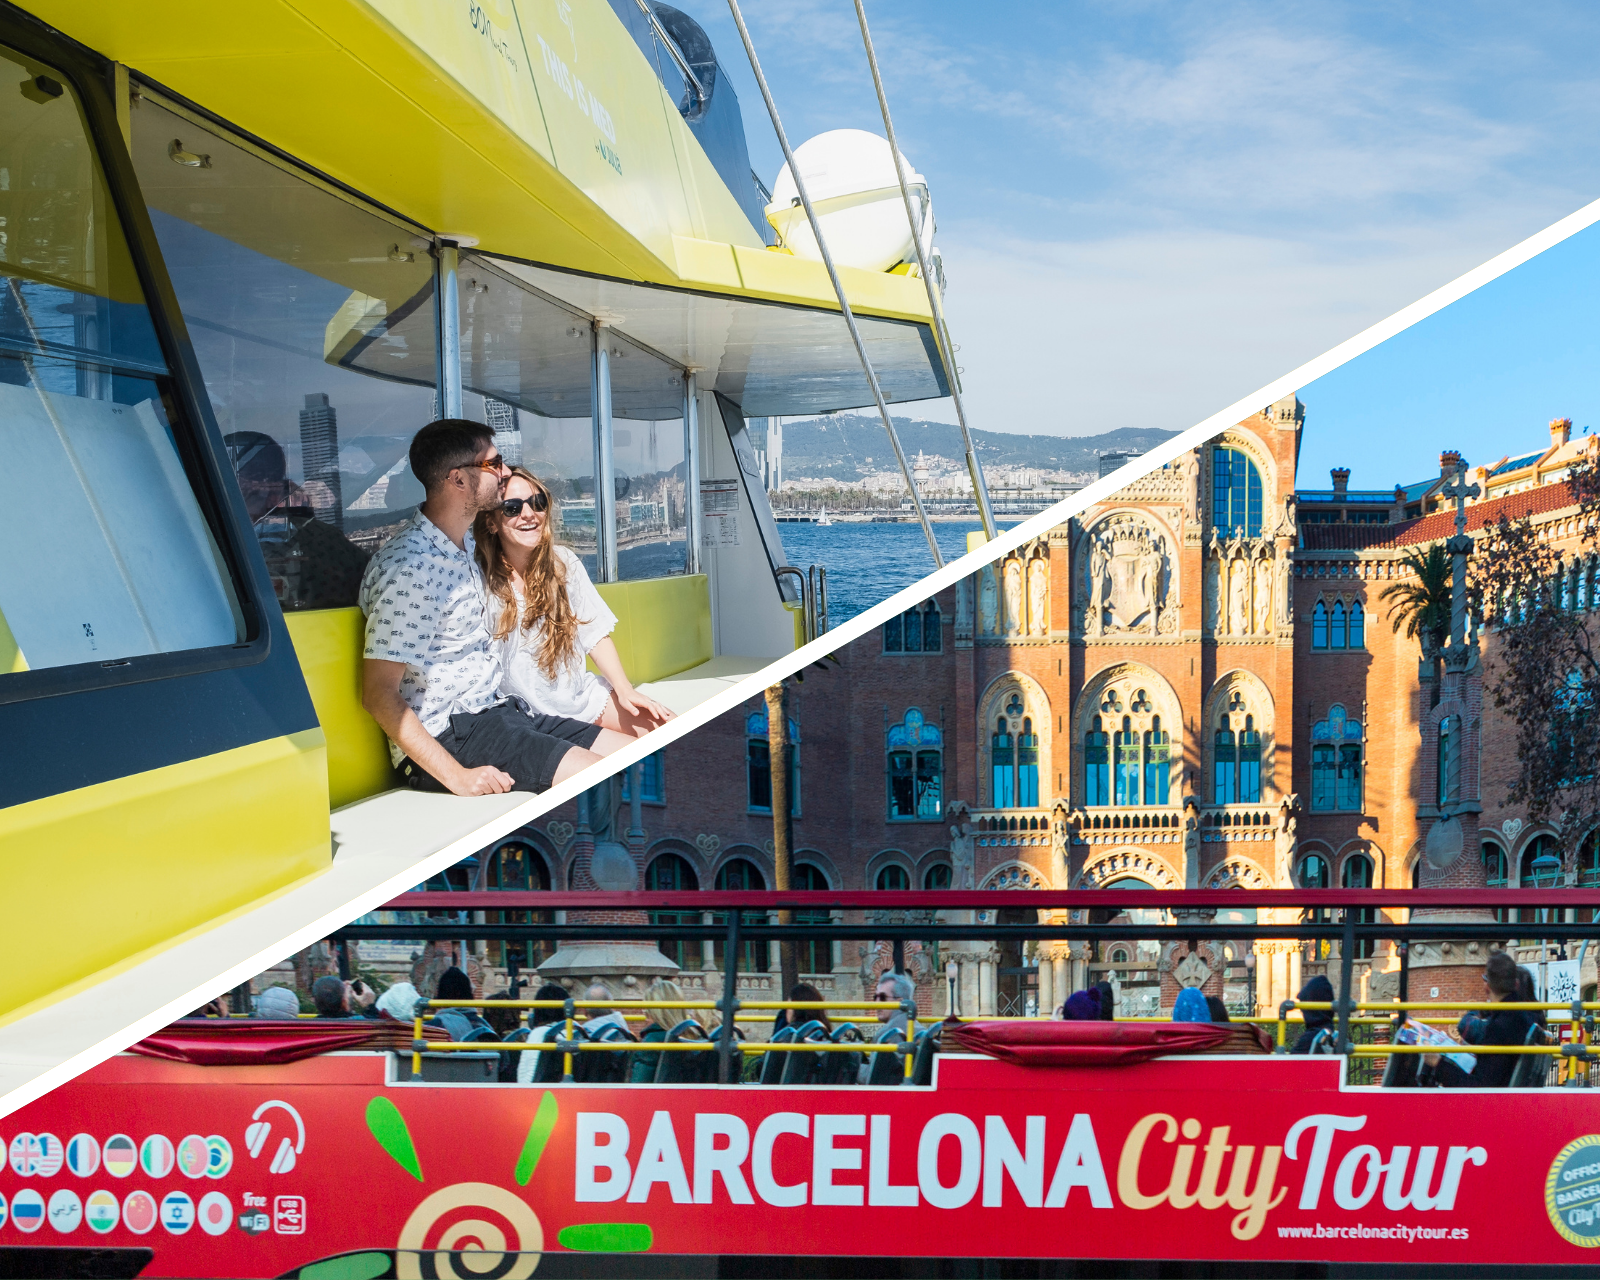 A photo showing people on a Catamaran Cruise, and a bus tour in Barcelona.